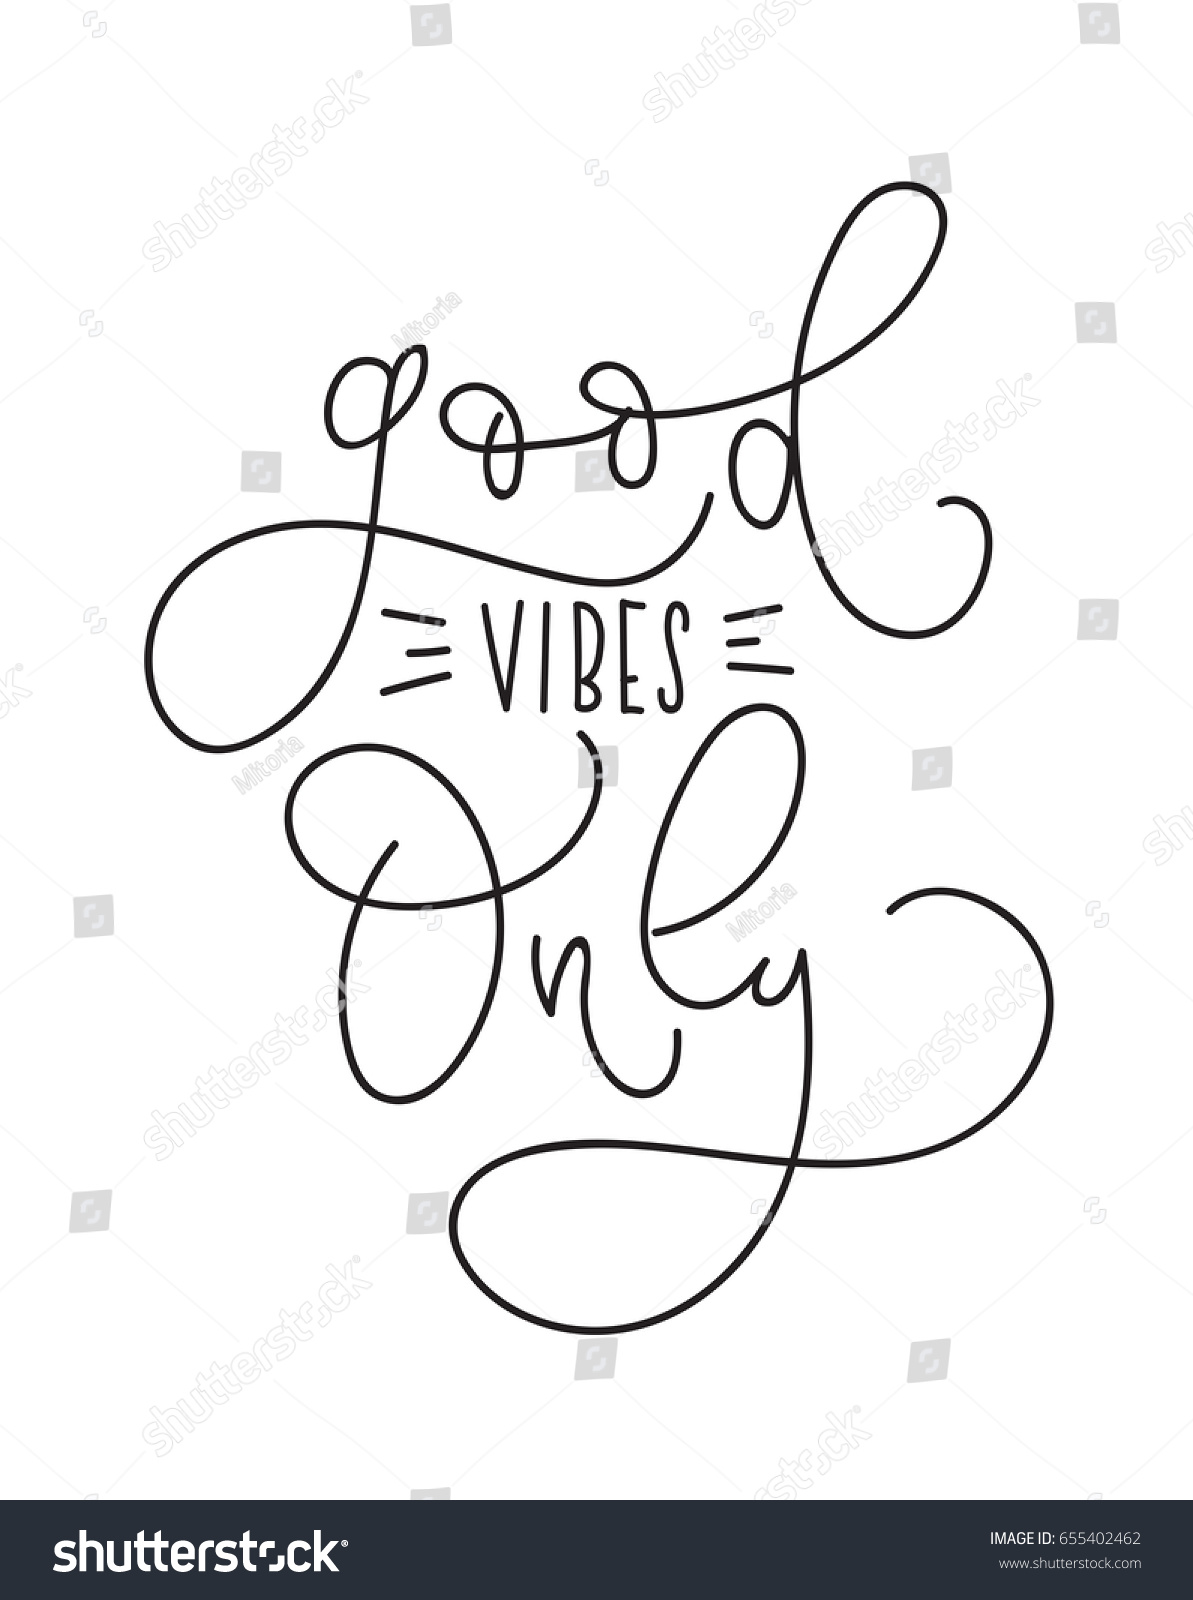 Good Vibes Only Inspirational Quote Modern Stock Vector (Royalty Free ...